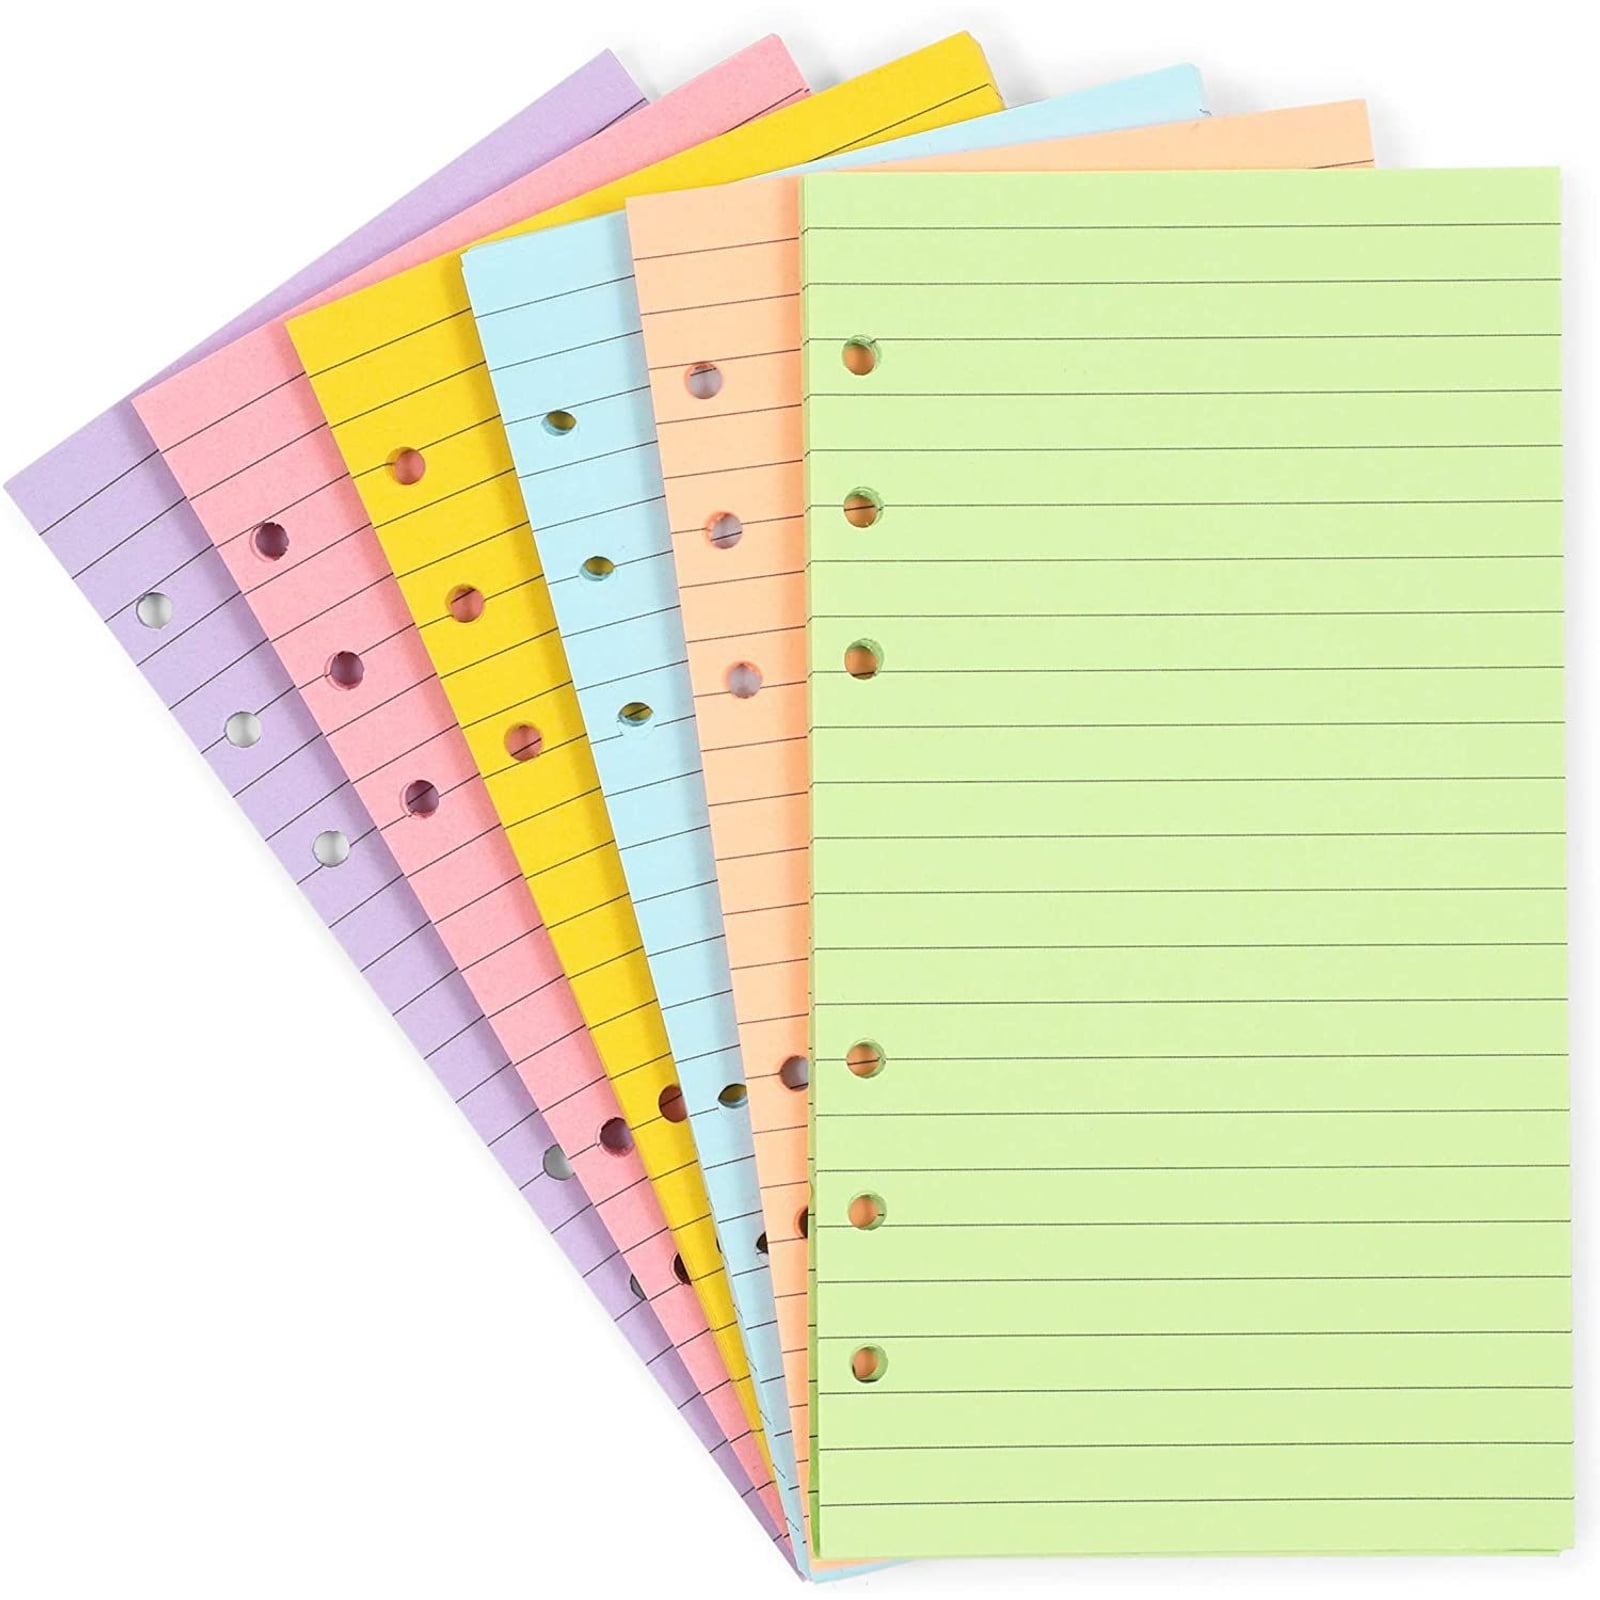 80 Sheet A4 Size Lined Paper Refills Inserts for Loose Leaf Planner Notebook 